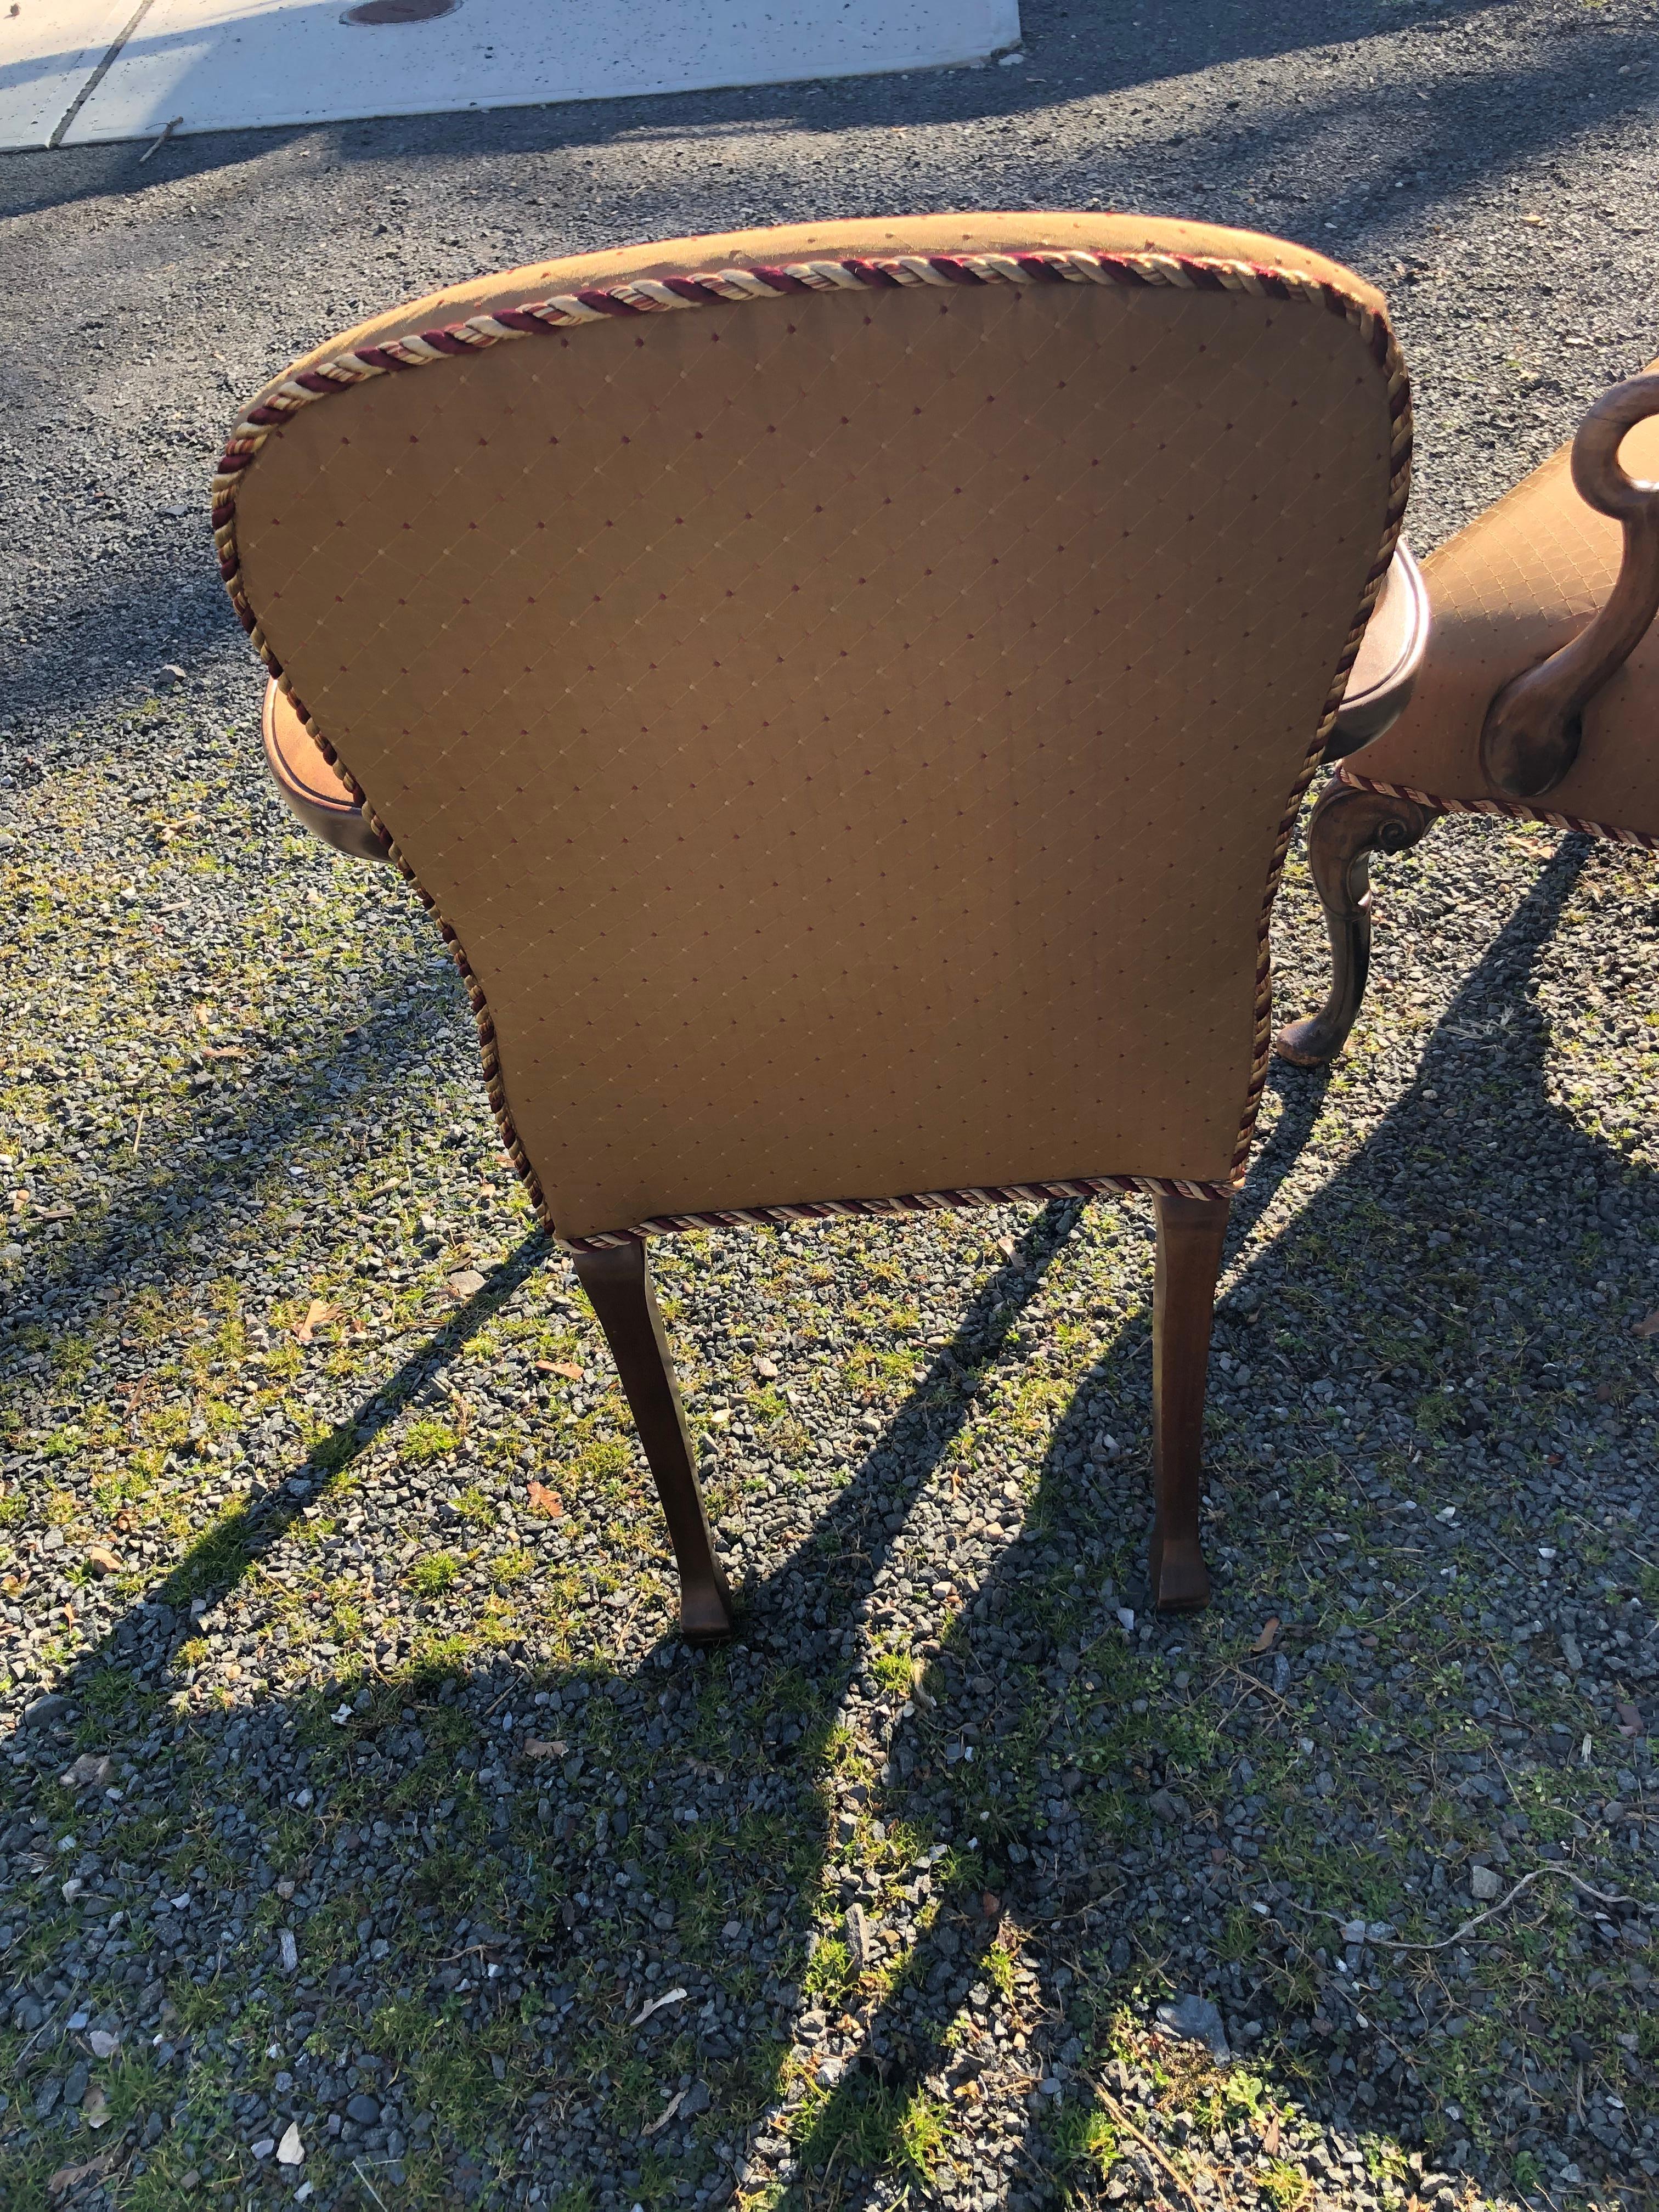 Great looking versatile armchair having light colored brown wood curvy arms and pretty legs with carvings on top.  The top is rounded.  Newly upholstered in a handsome taupey fabric.
Note:  A square back armchair in matching fabric goes well matched